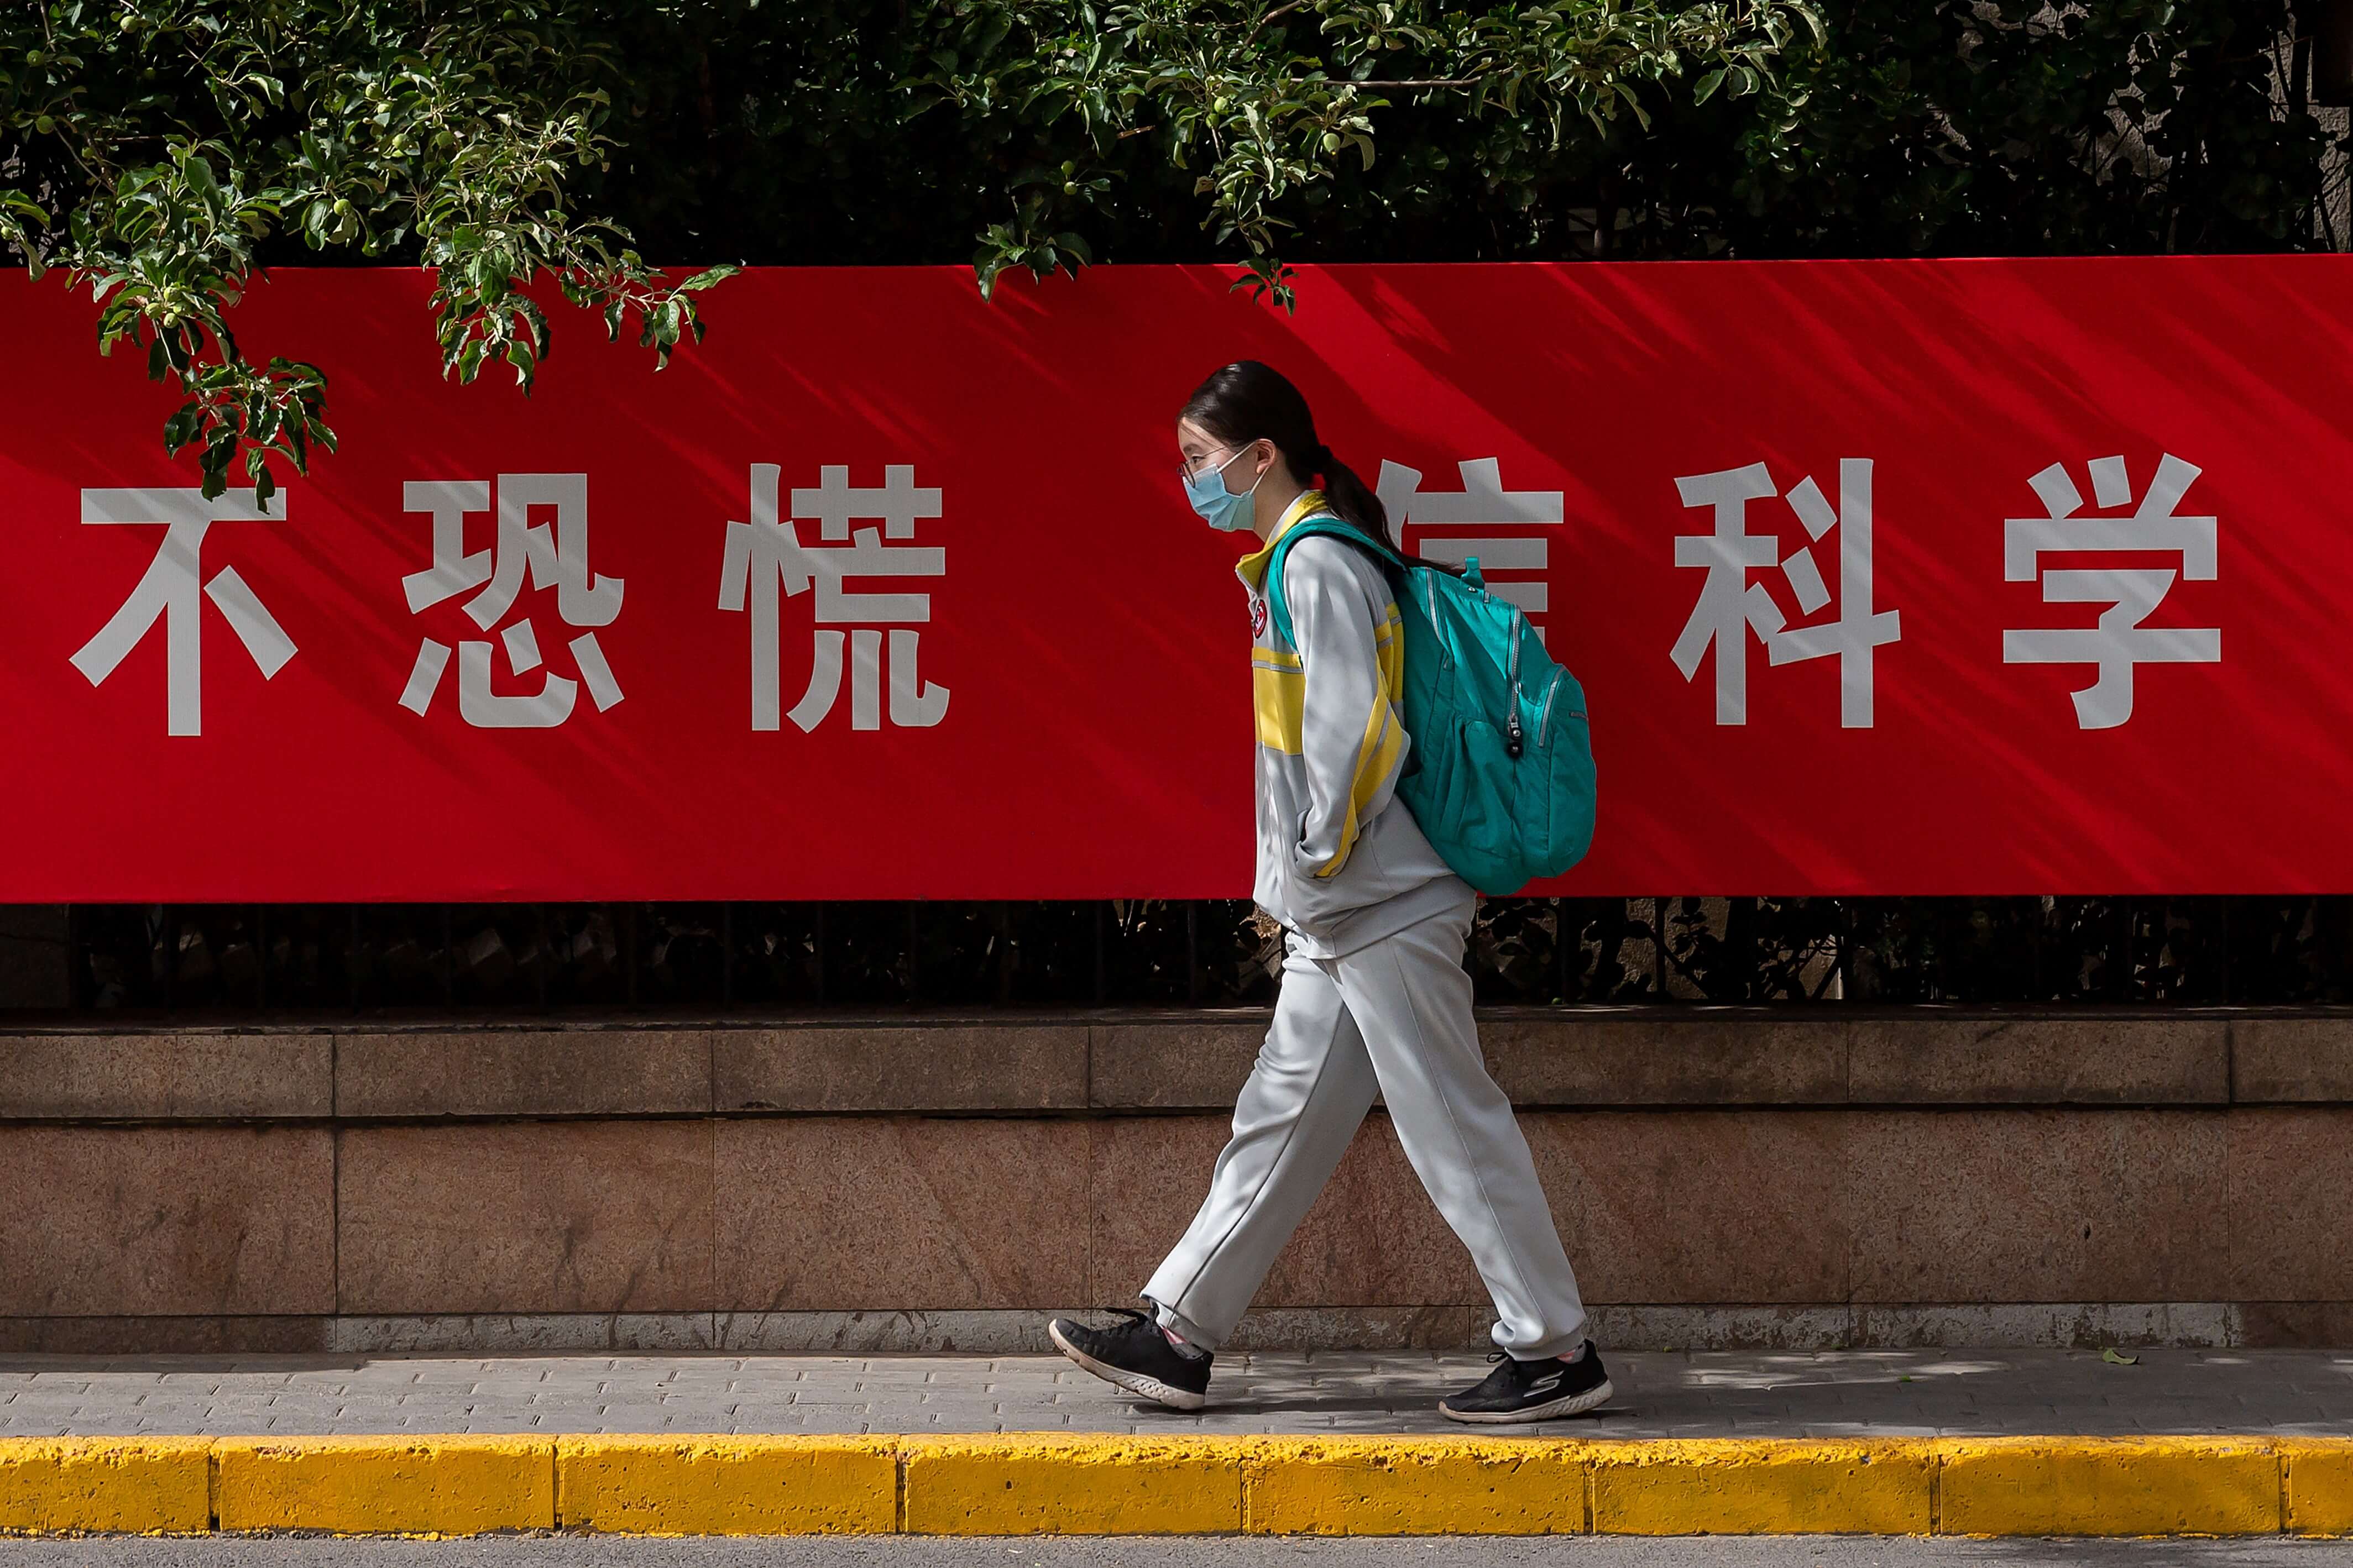 Tired of China's border closures? Here's how to transfer out of a Chinese university